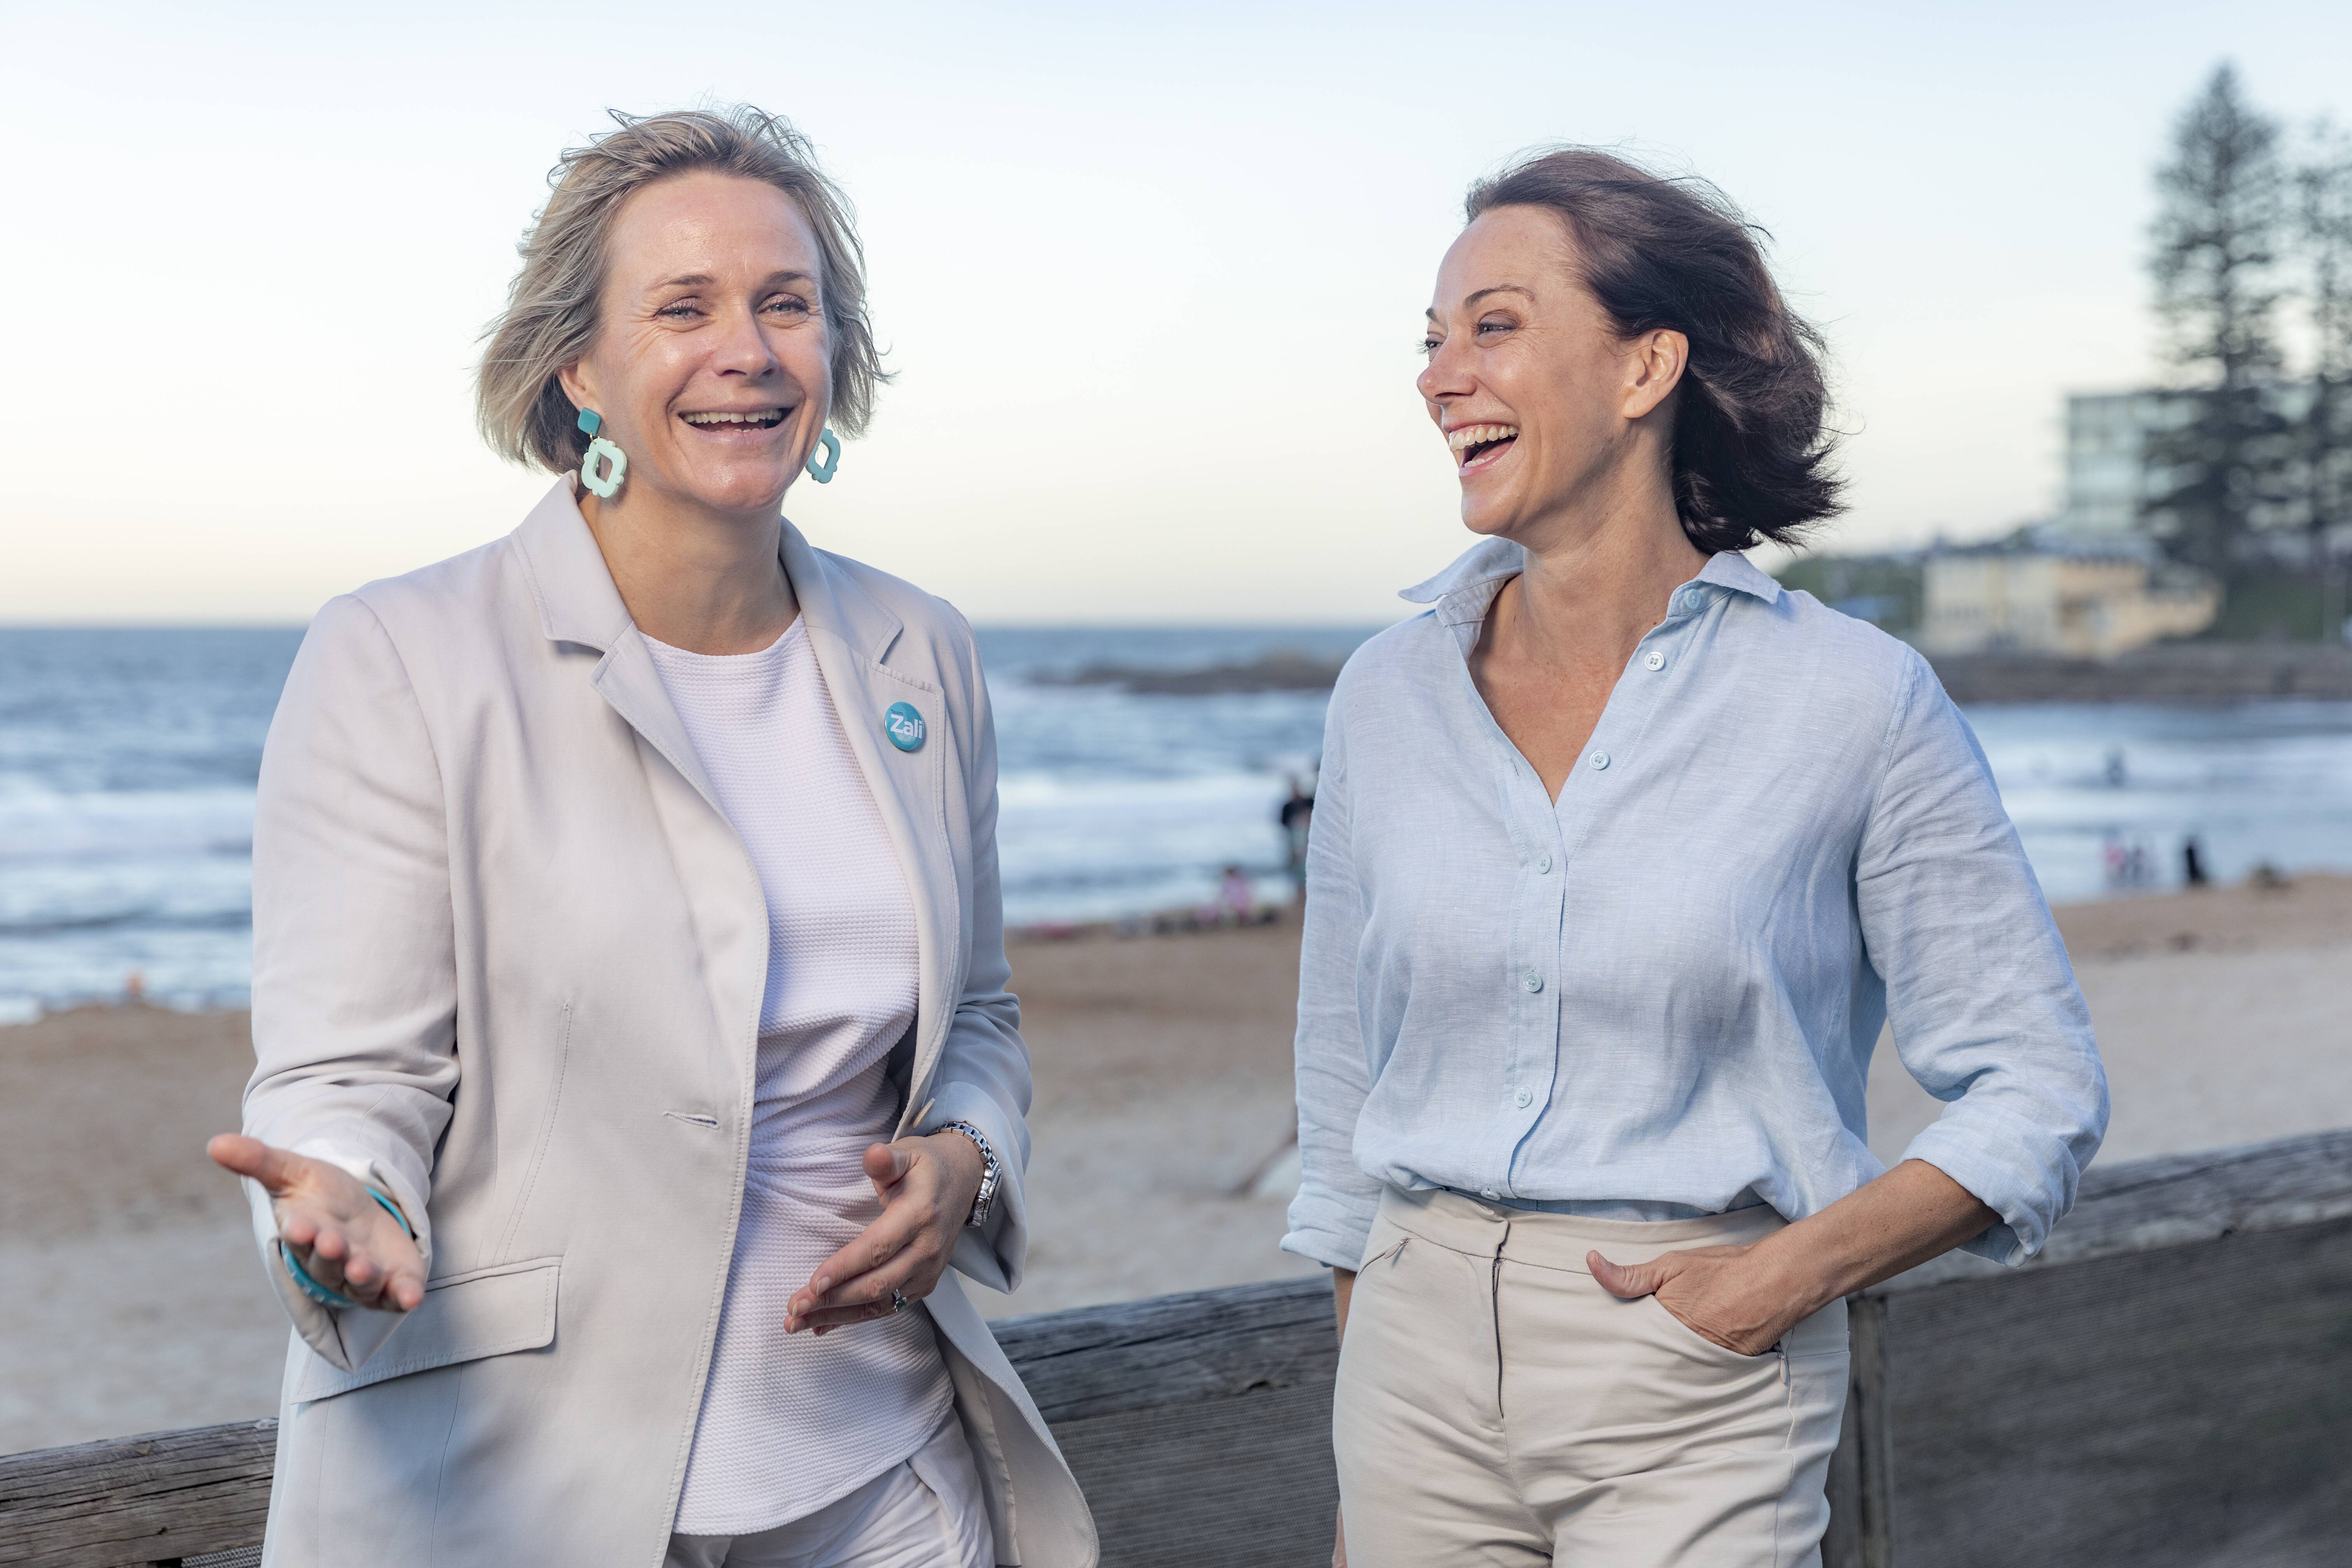 Federal election: Northern beaches is seeing a rise of the